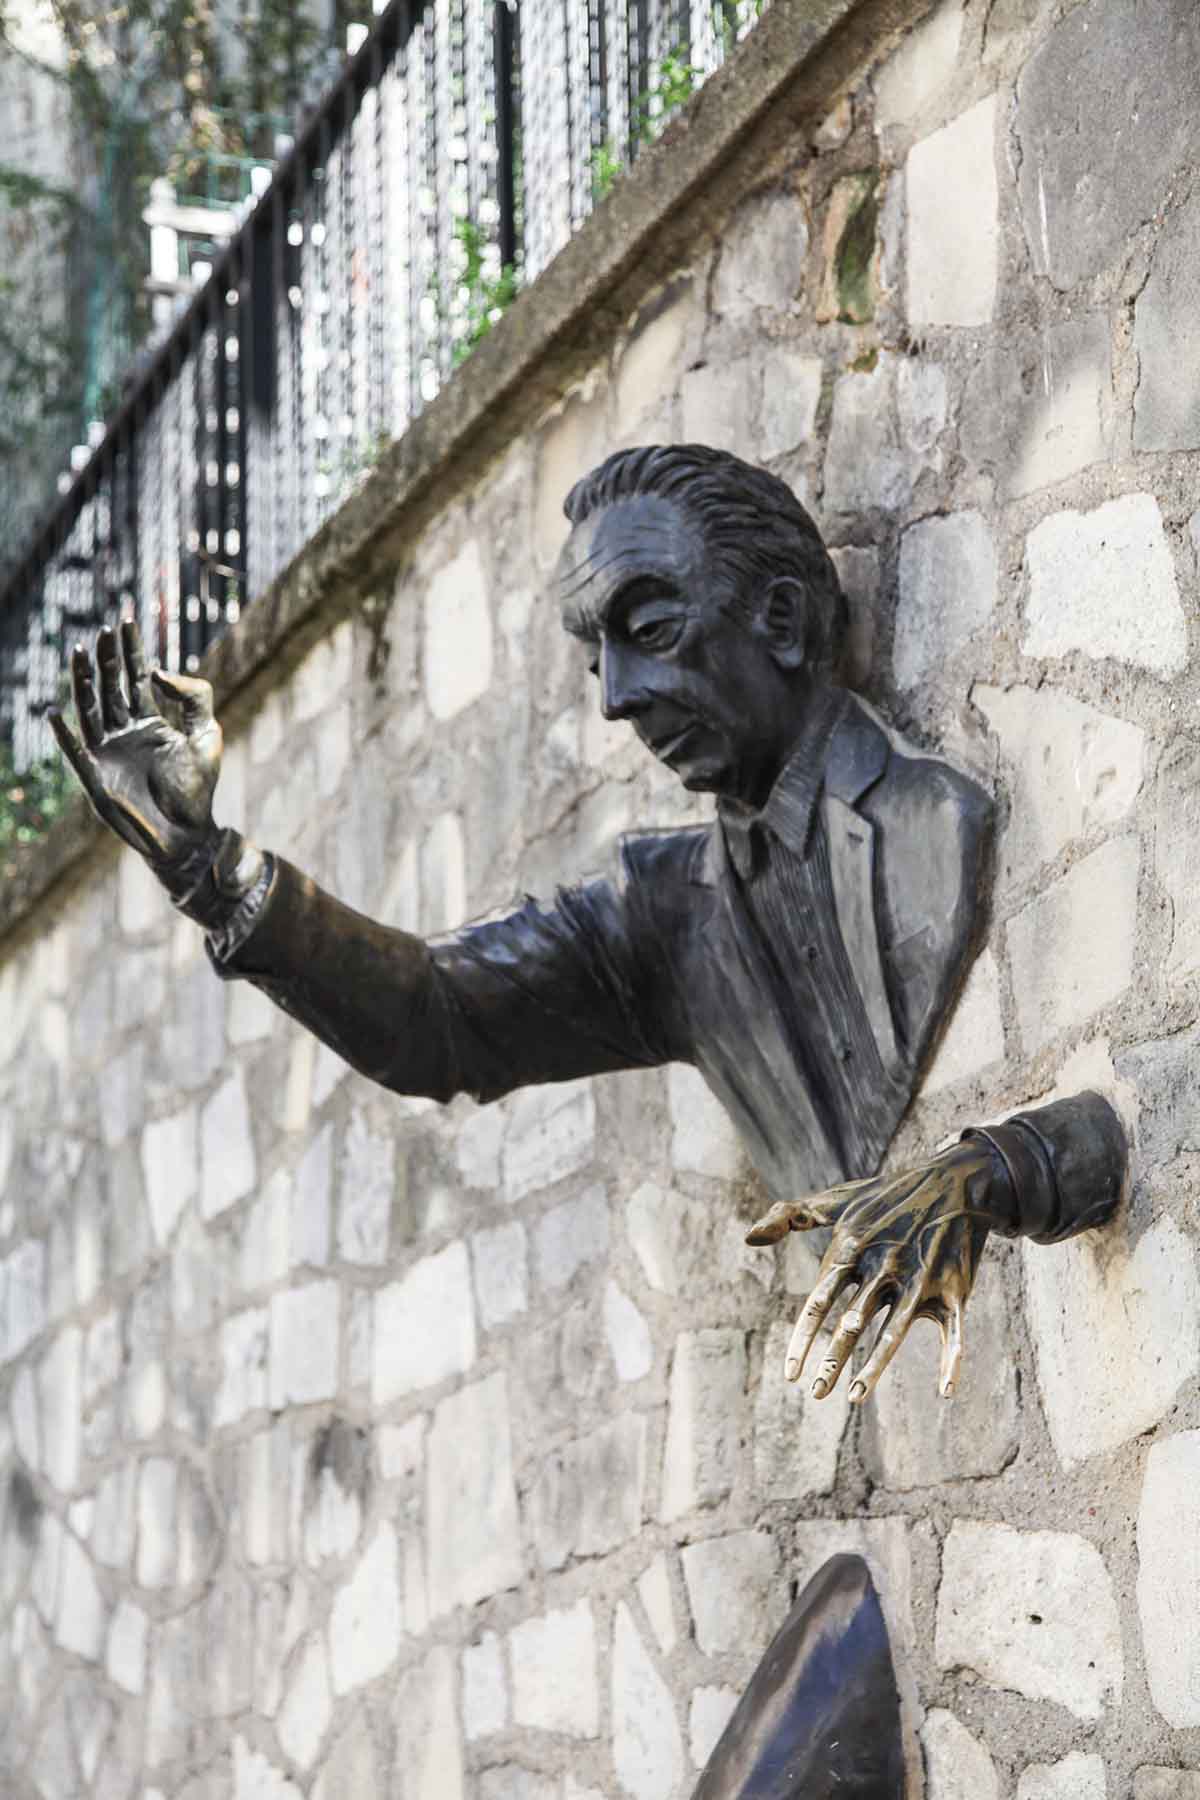 Le Passe-muraille, the mysterious statue of Montmartre